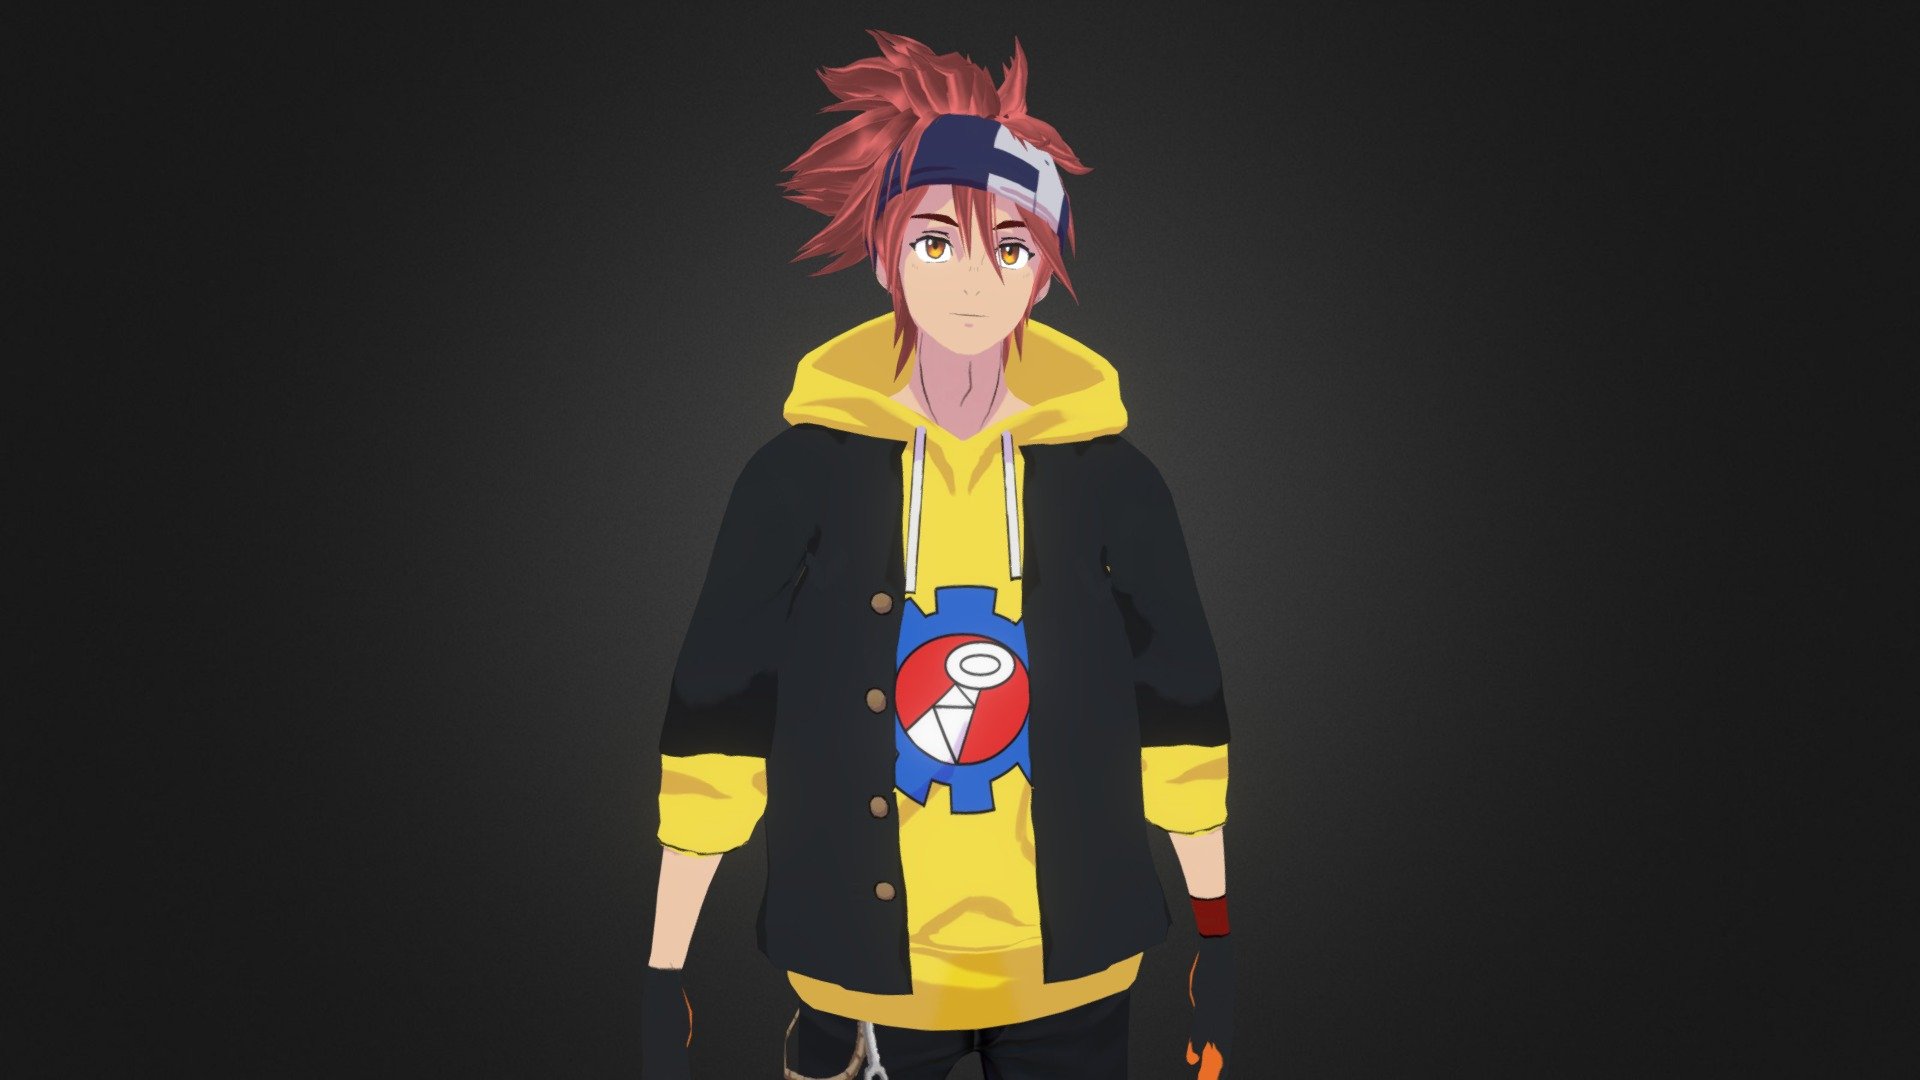 He do be sk8ting yknow. An avatar I made for fun. You can get this avatar on VRChat in a place called Sk8 the Infinity Skins. You can check out the process here! I updated him a bit since the video though.
https://youtu.be/QESax3y-1Wc

I make avatars of anime and comic book characters, or anime styled characters. If you want a custom avatar you can DM me on instagram, discord, or twitter. Please note I do not make avatars for free.

Discord: Wacky Demon Fire#1575 Links are on my main page 3d model